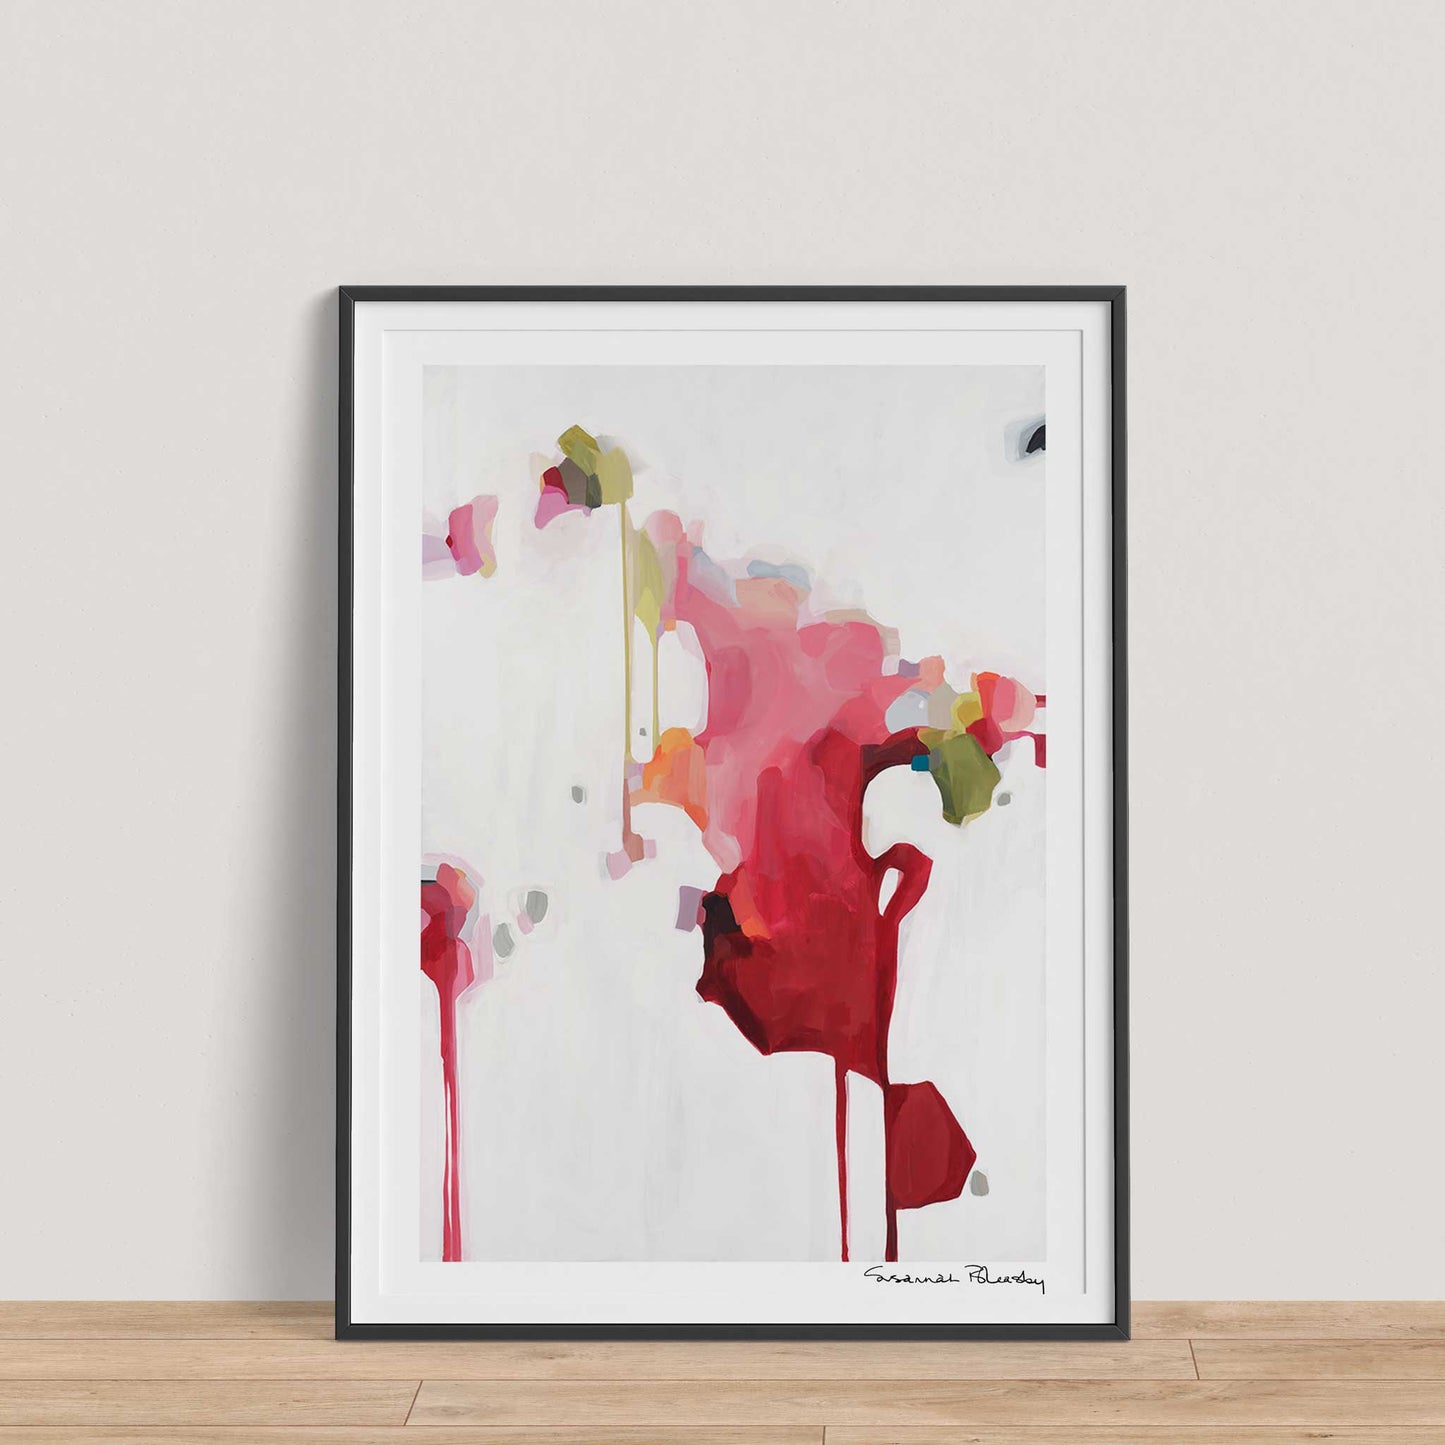 Framed colorful abstract art print created based on original acrylic painting by Susannah Bleasby